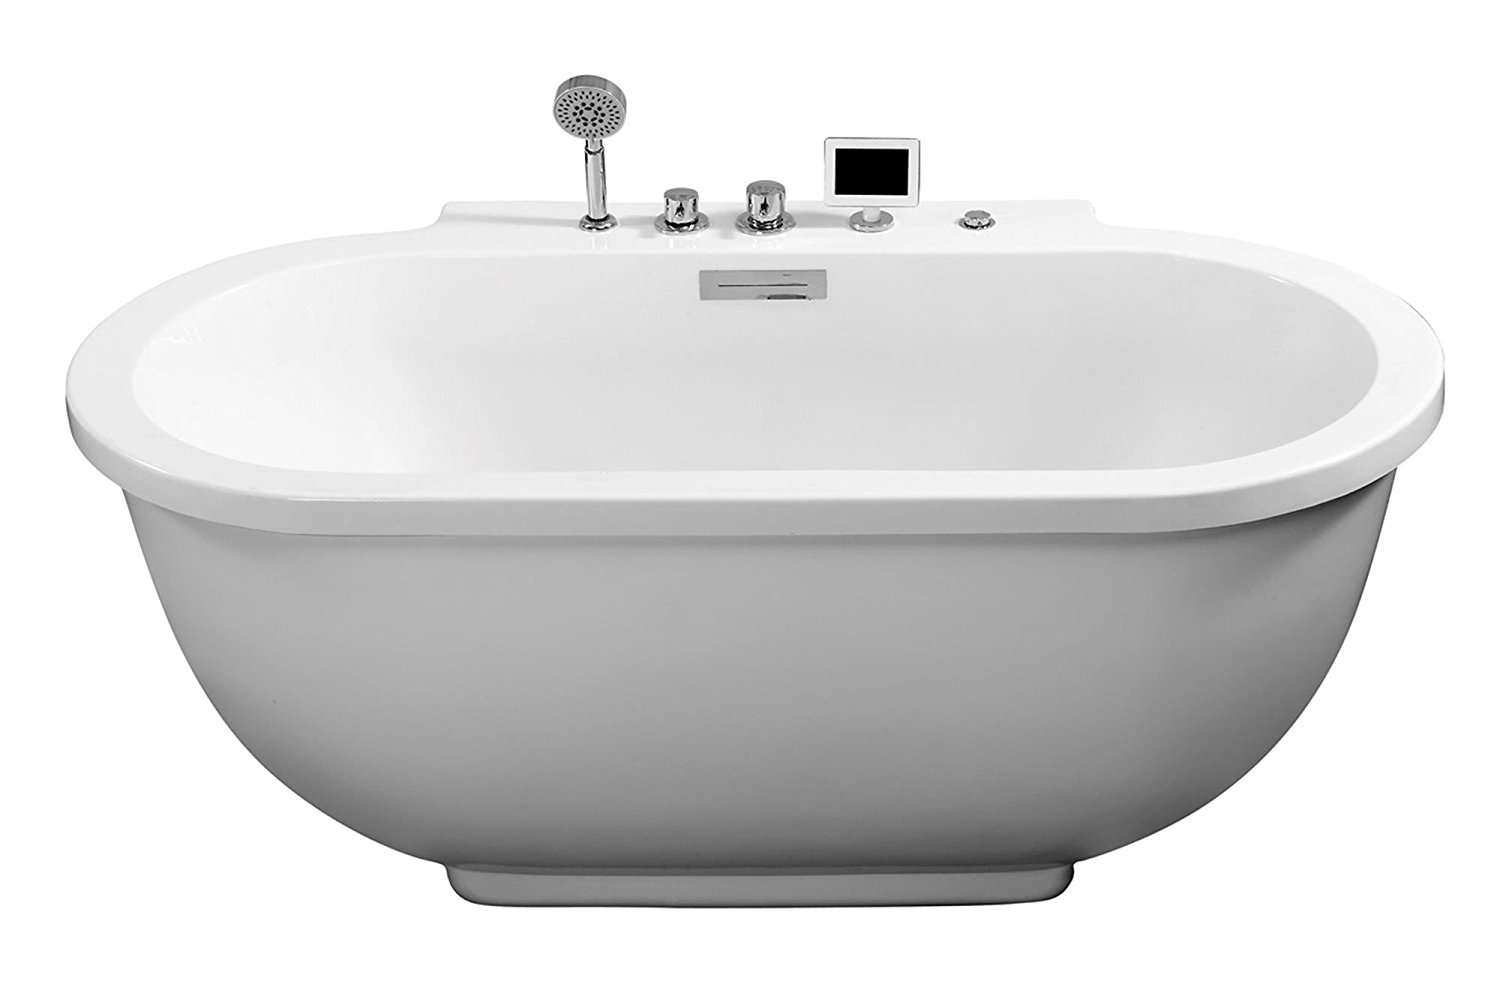 Ariel AM128JDCLZ Bath Whirlpool Tub, Rounded Front, White